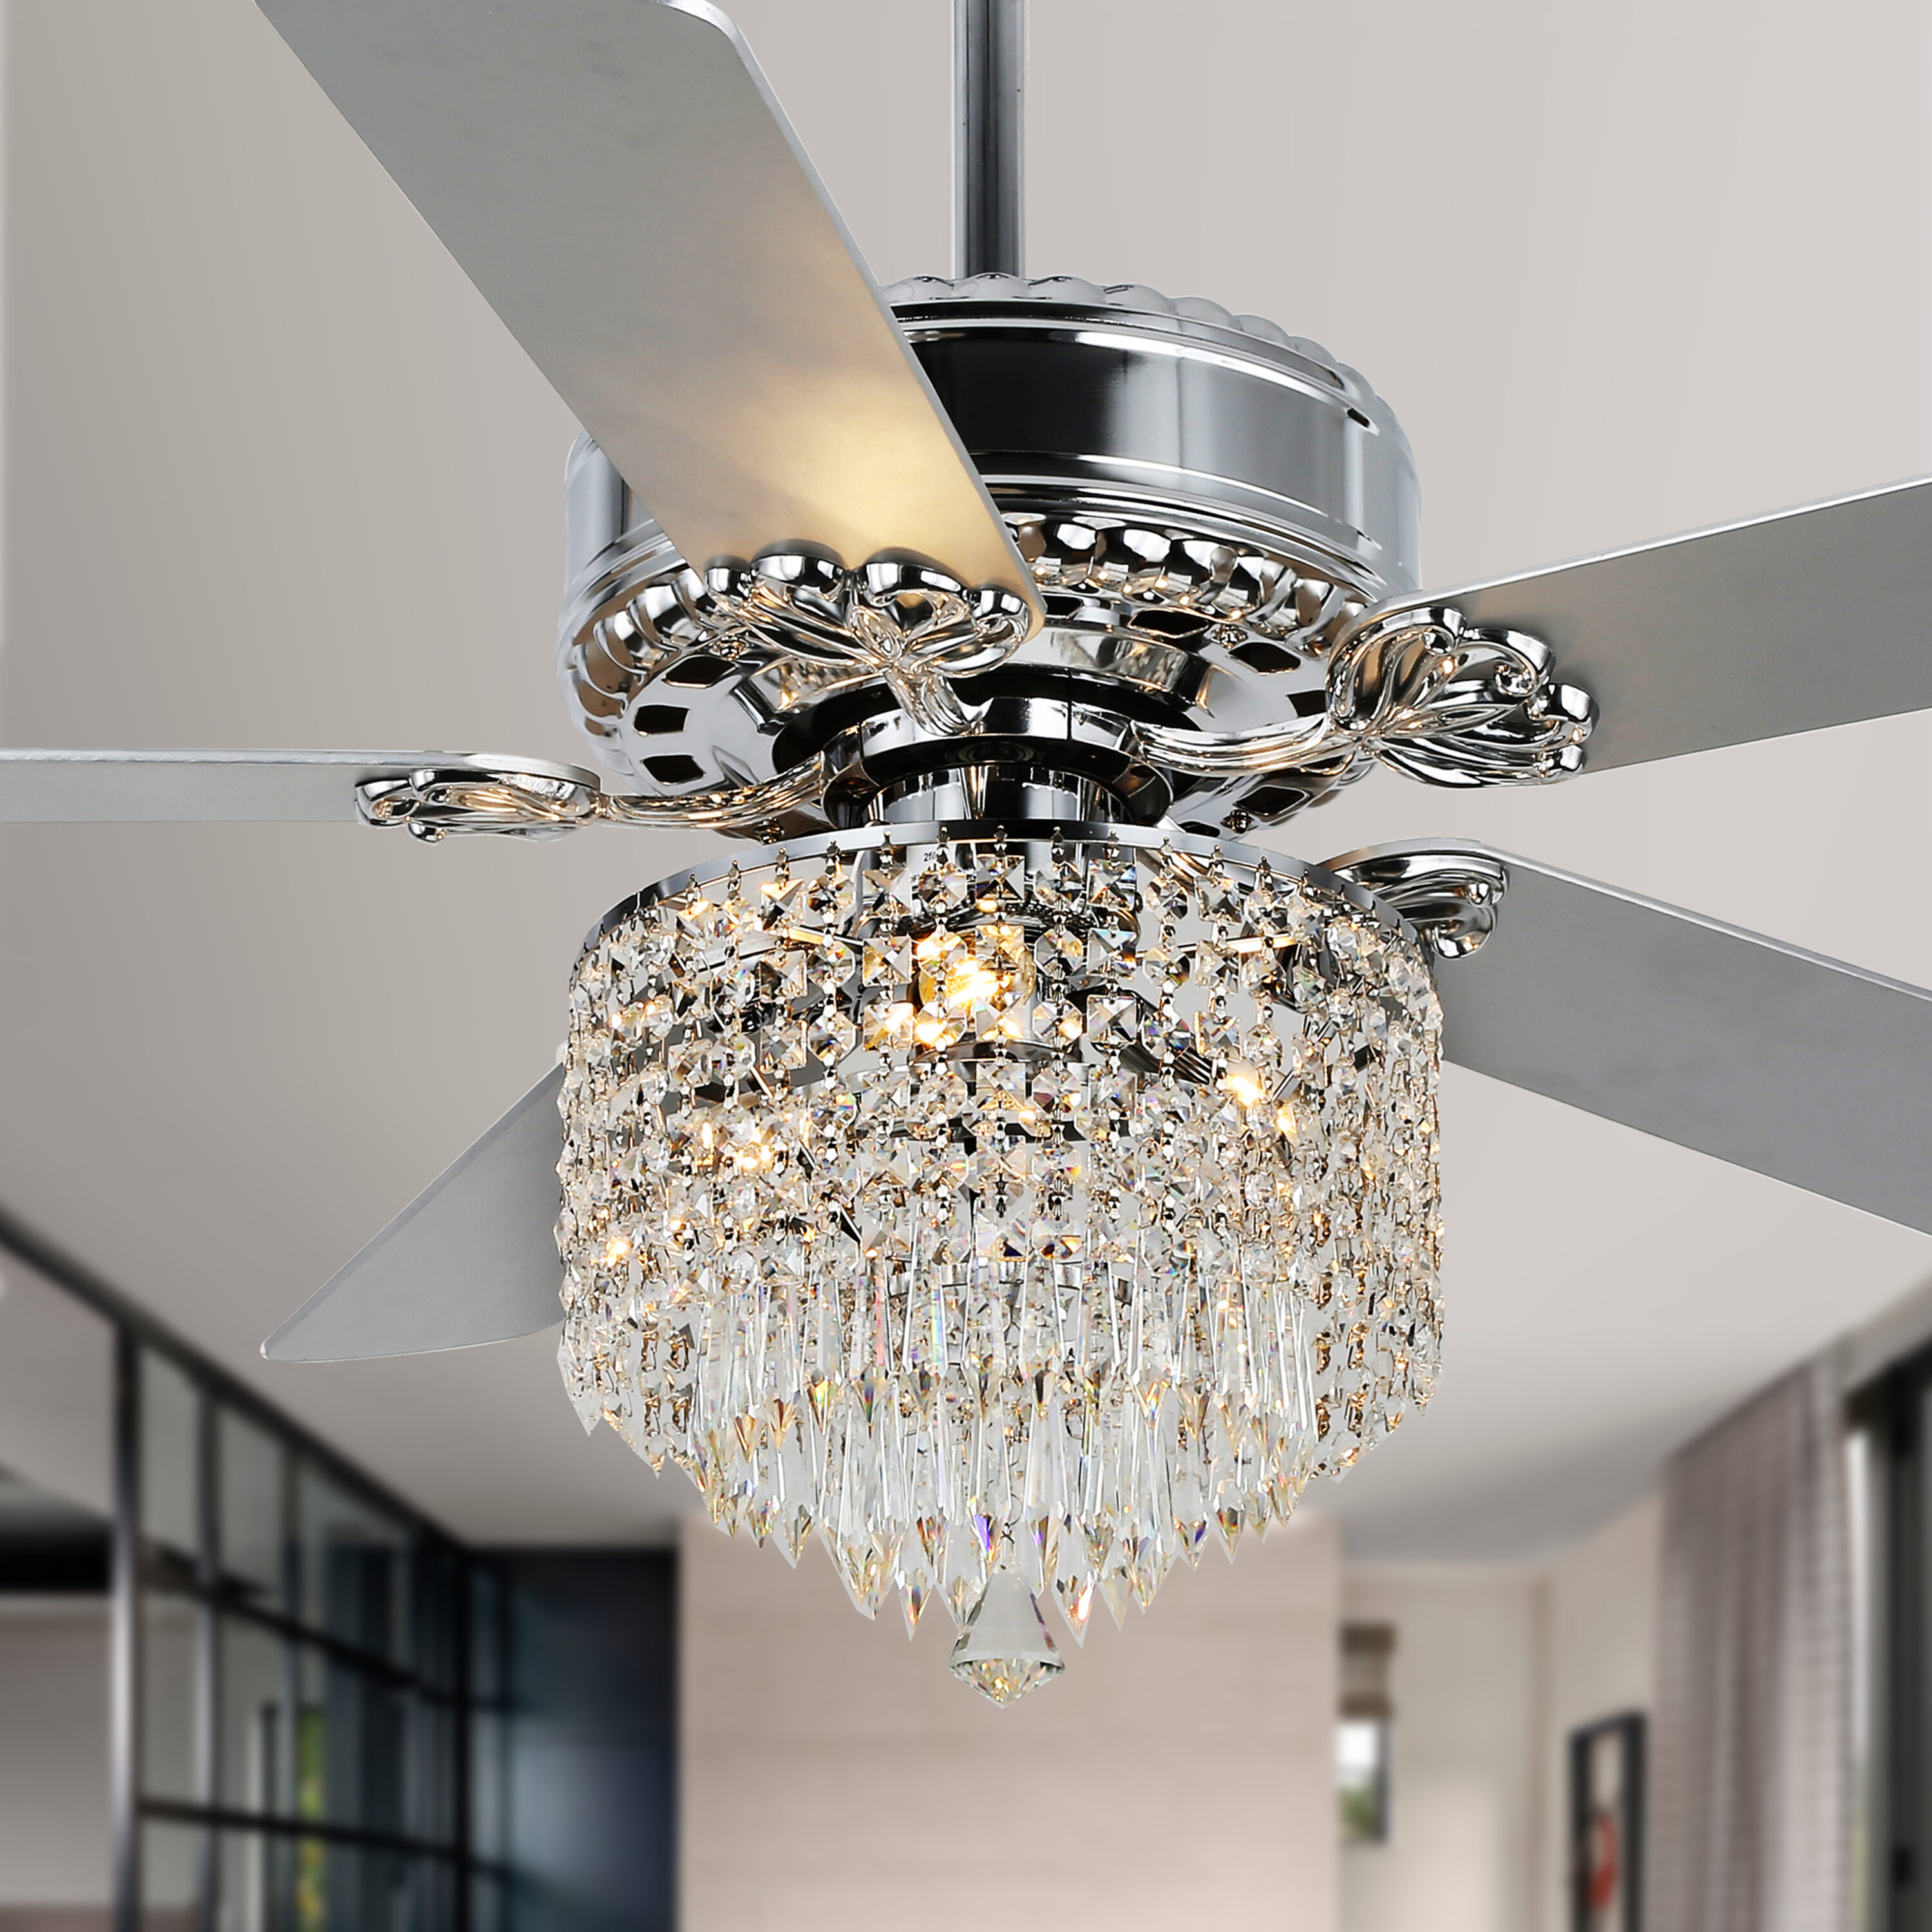 Oaks Decor Modern Glam Chrome Crystal 5 Reversible Blades Fan Remote Control Included in Ceiling Fans department at Lowes.com